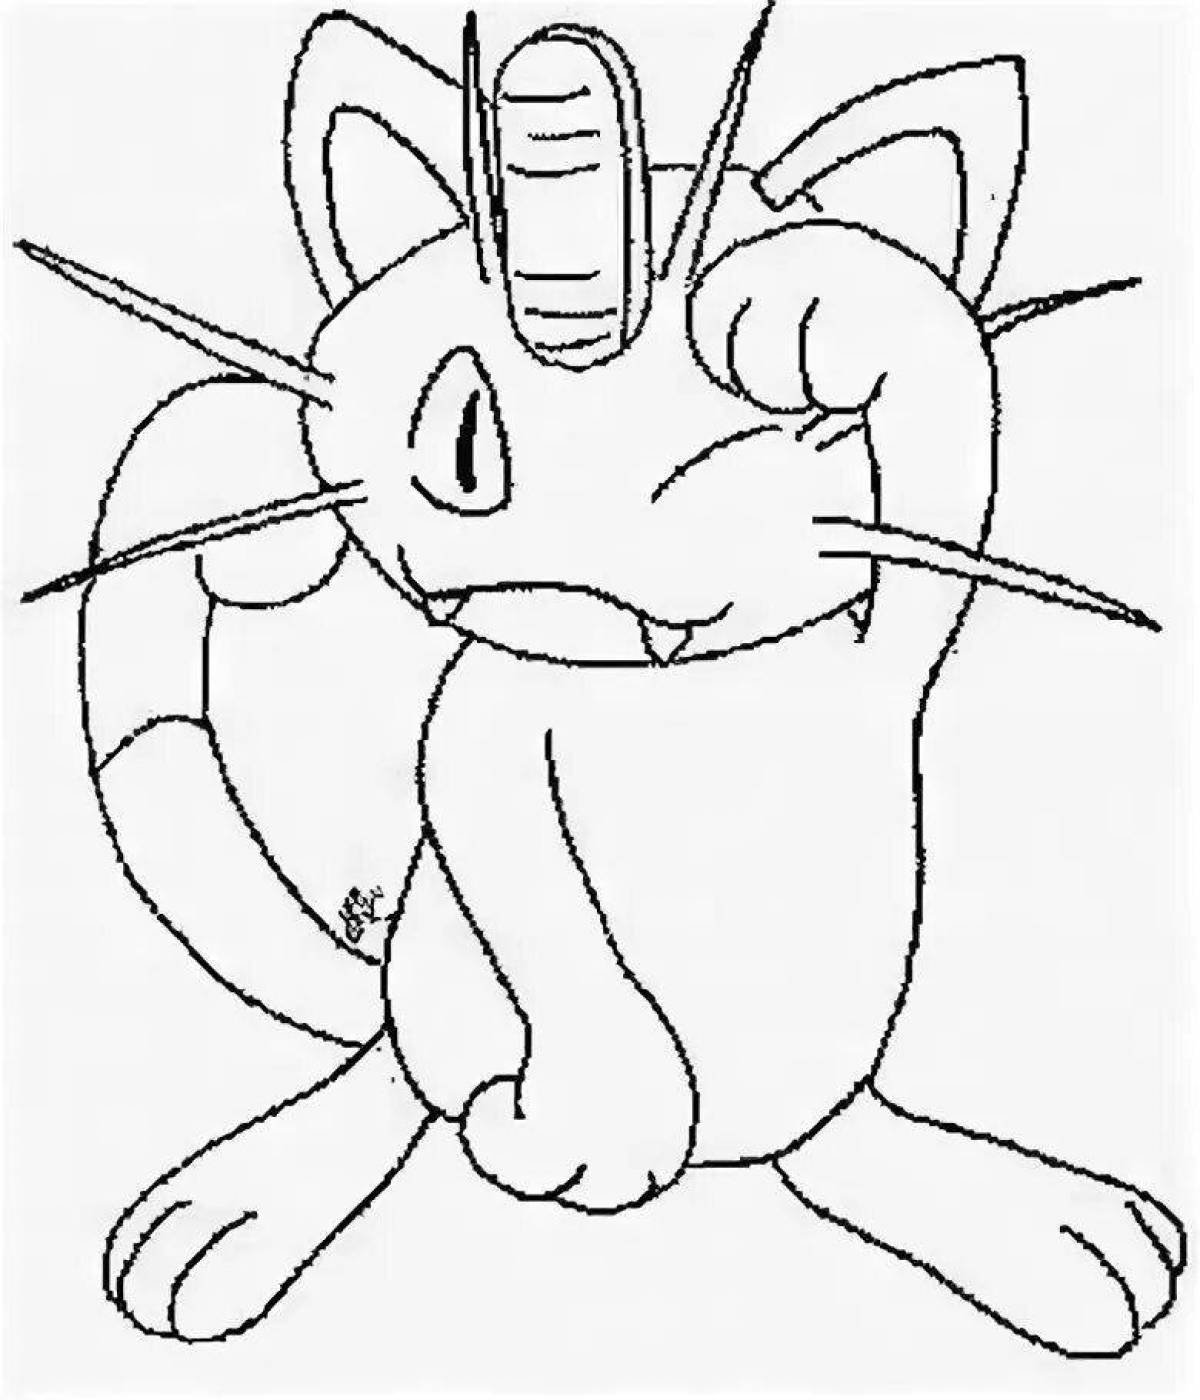 Radiant meowth coloring page